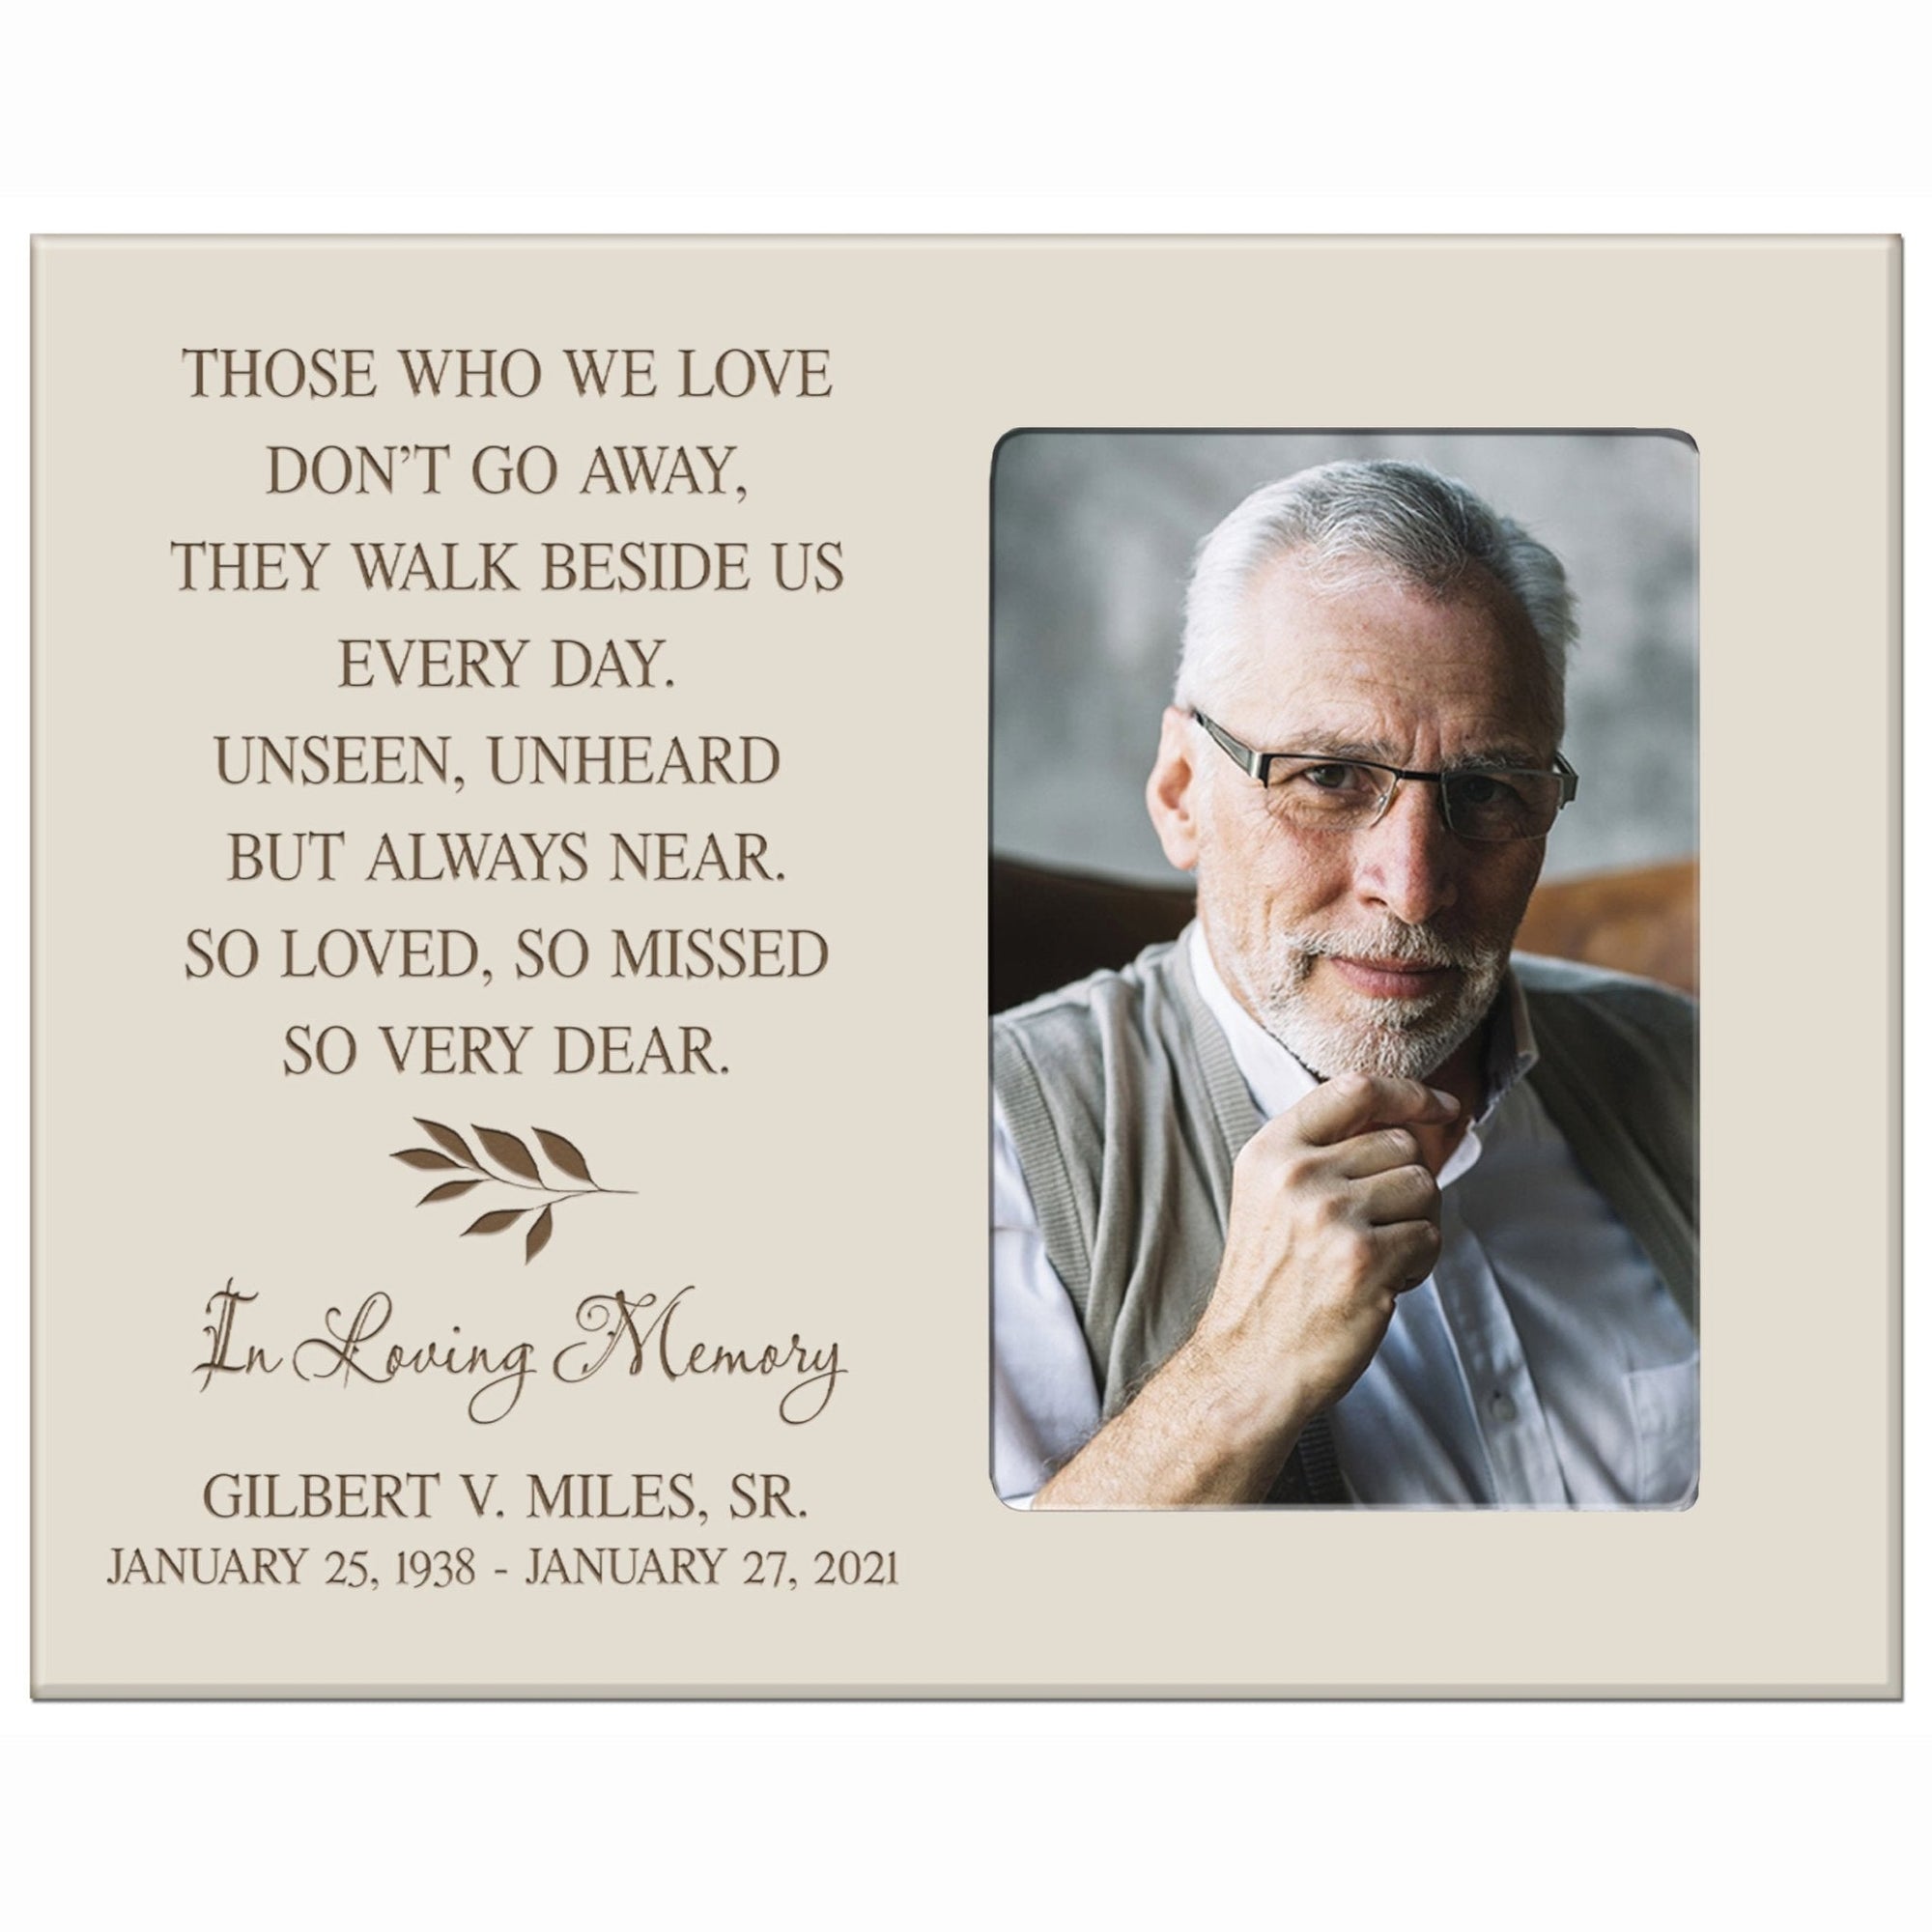 Personalized Horizontal 8x10 Wooden Memorial Picture Frame Holds 4x6 Photo - Those Who We Love - LifeSong Milestones